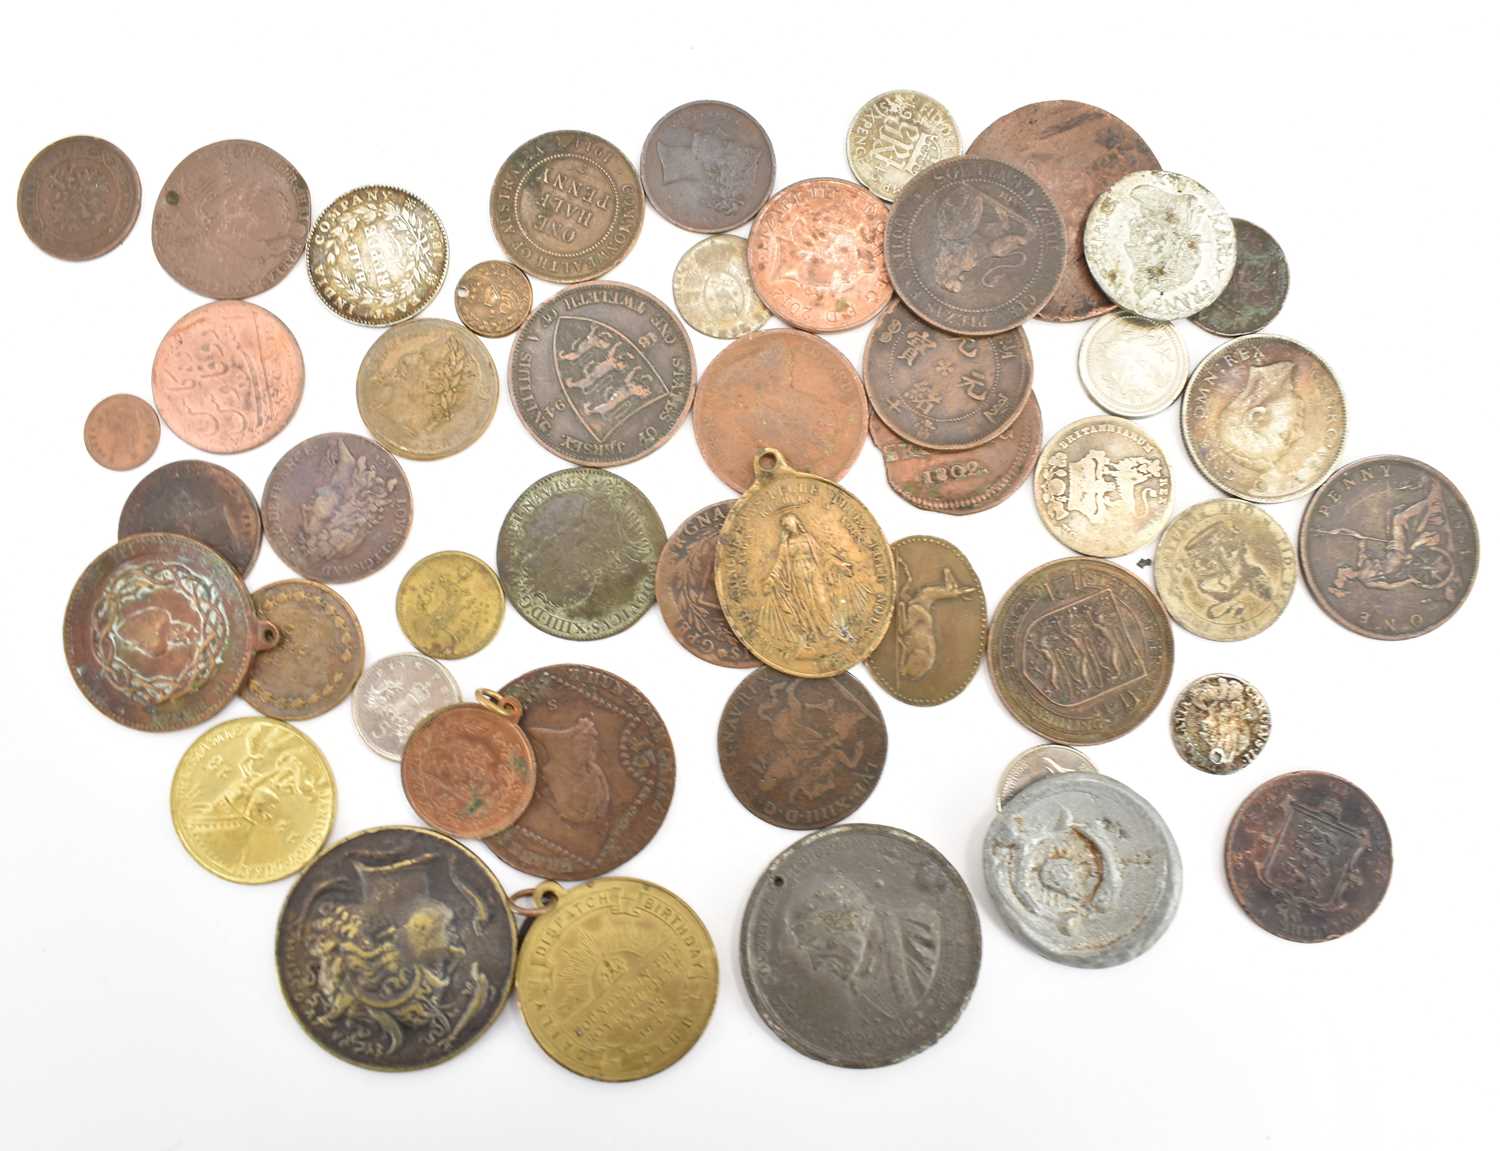 A small quantity of medals, medallions, coins, and tokens.